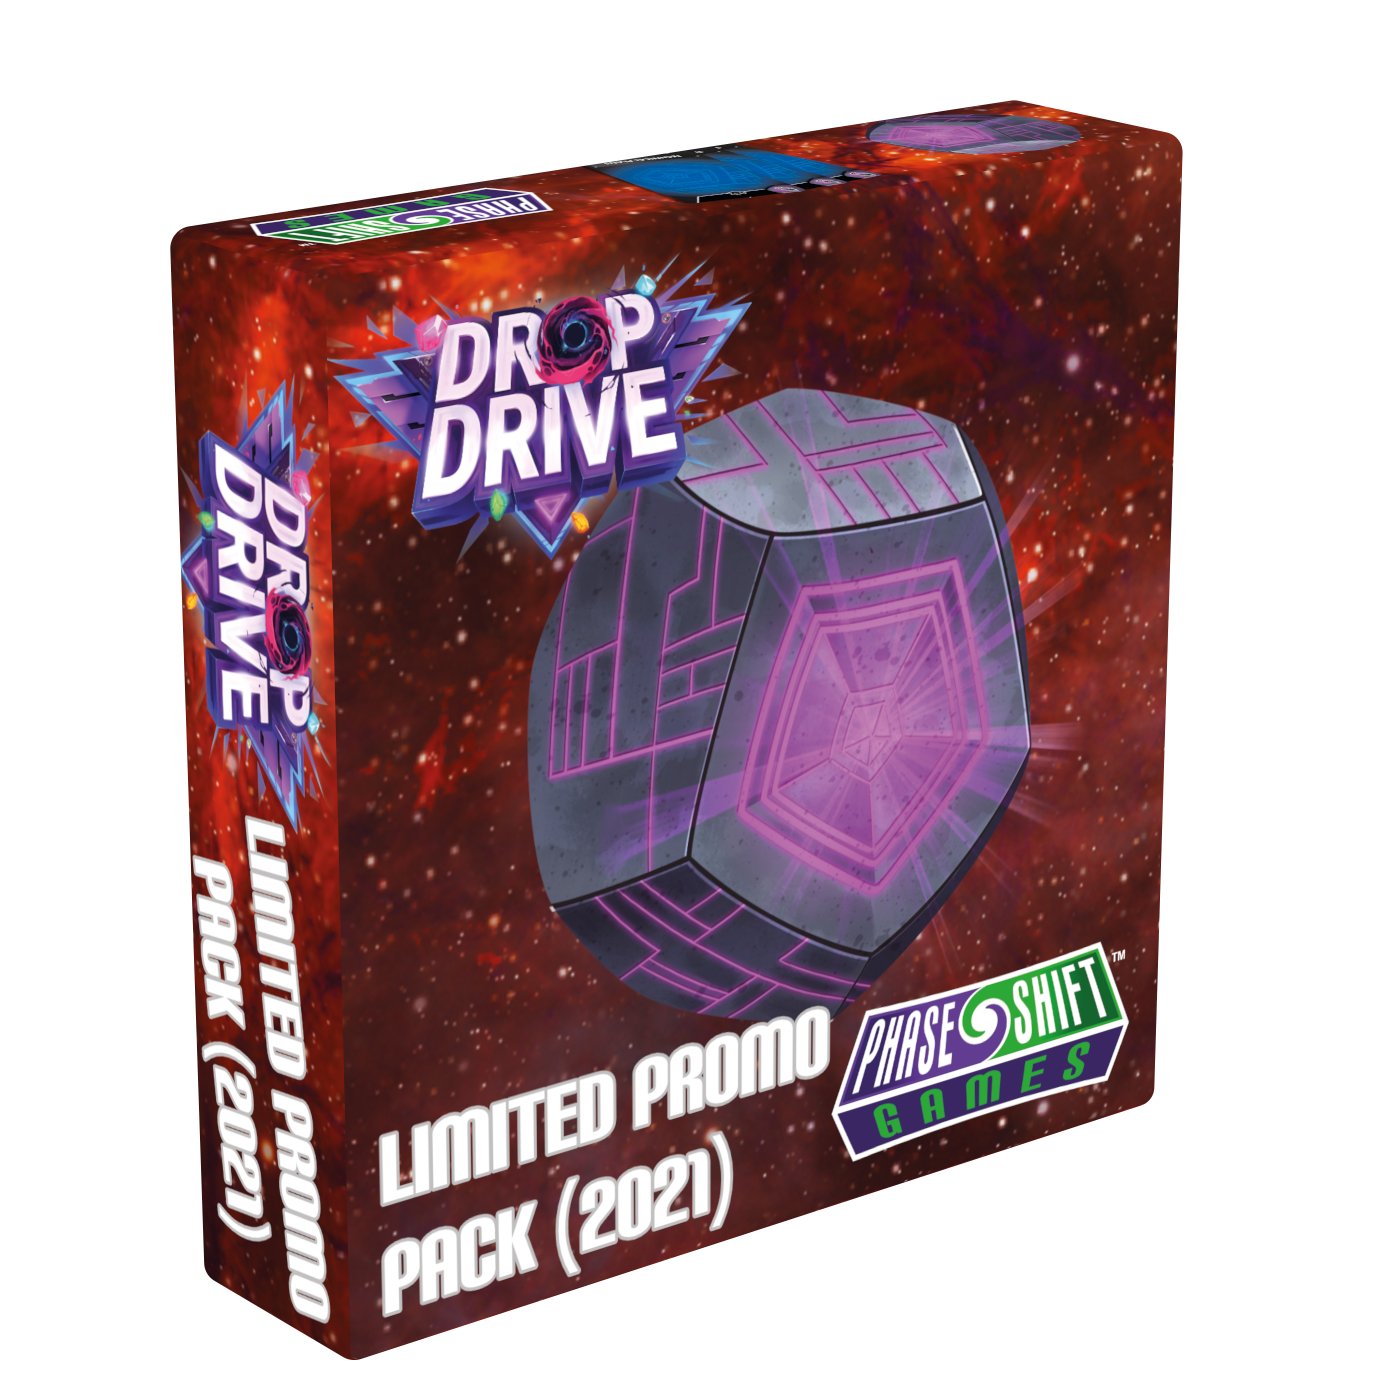 Limited Promo Pack (2021) - Phase Shift Games